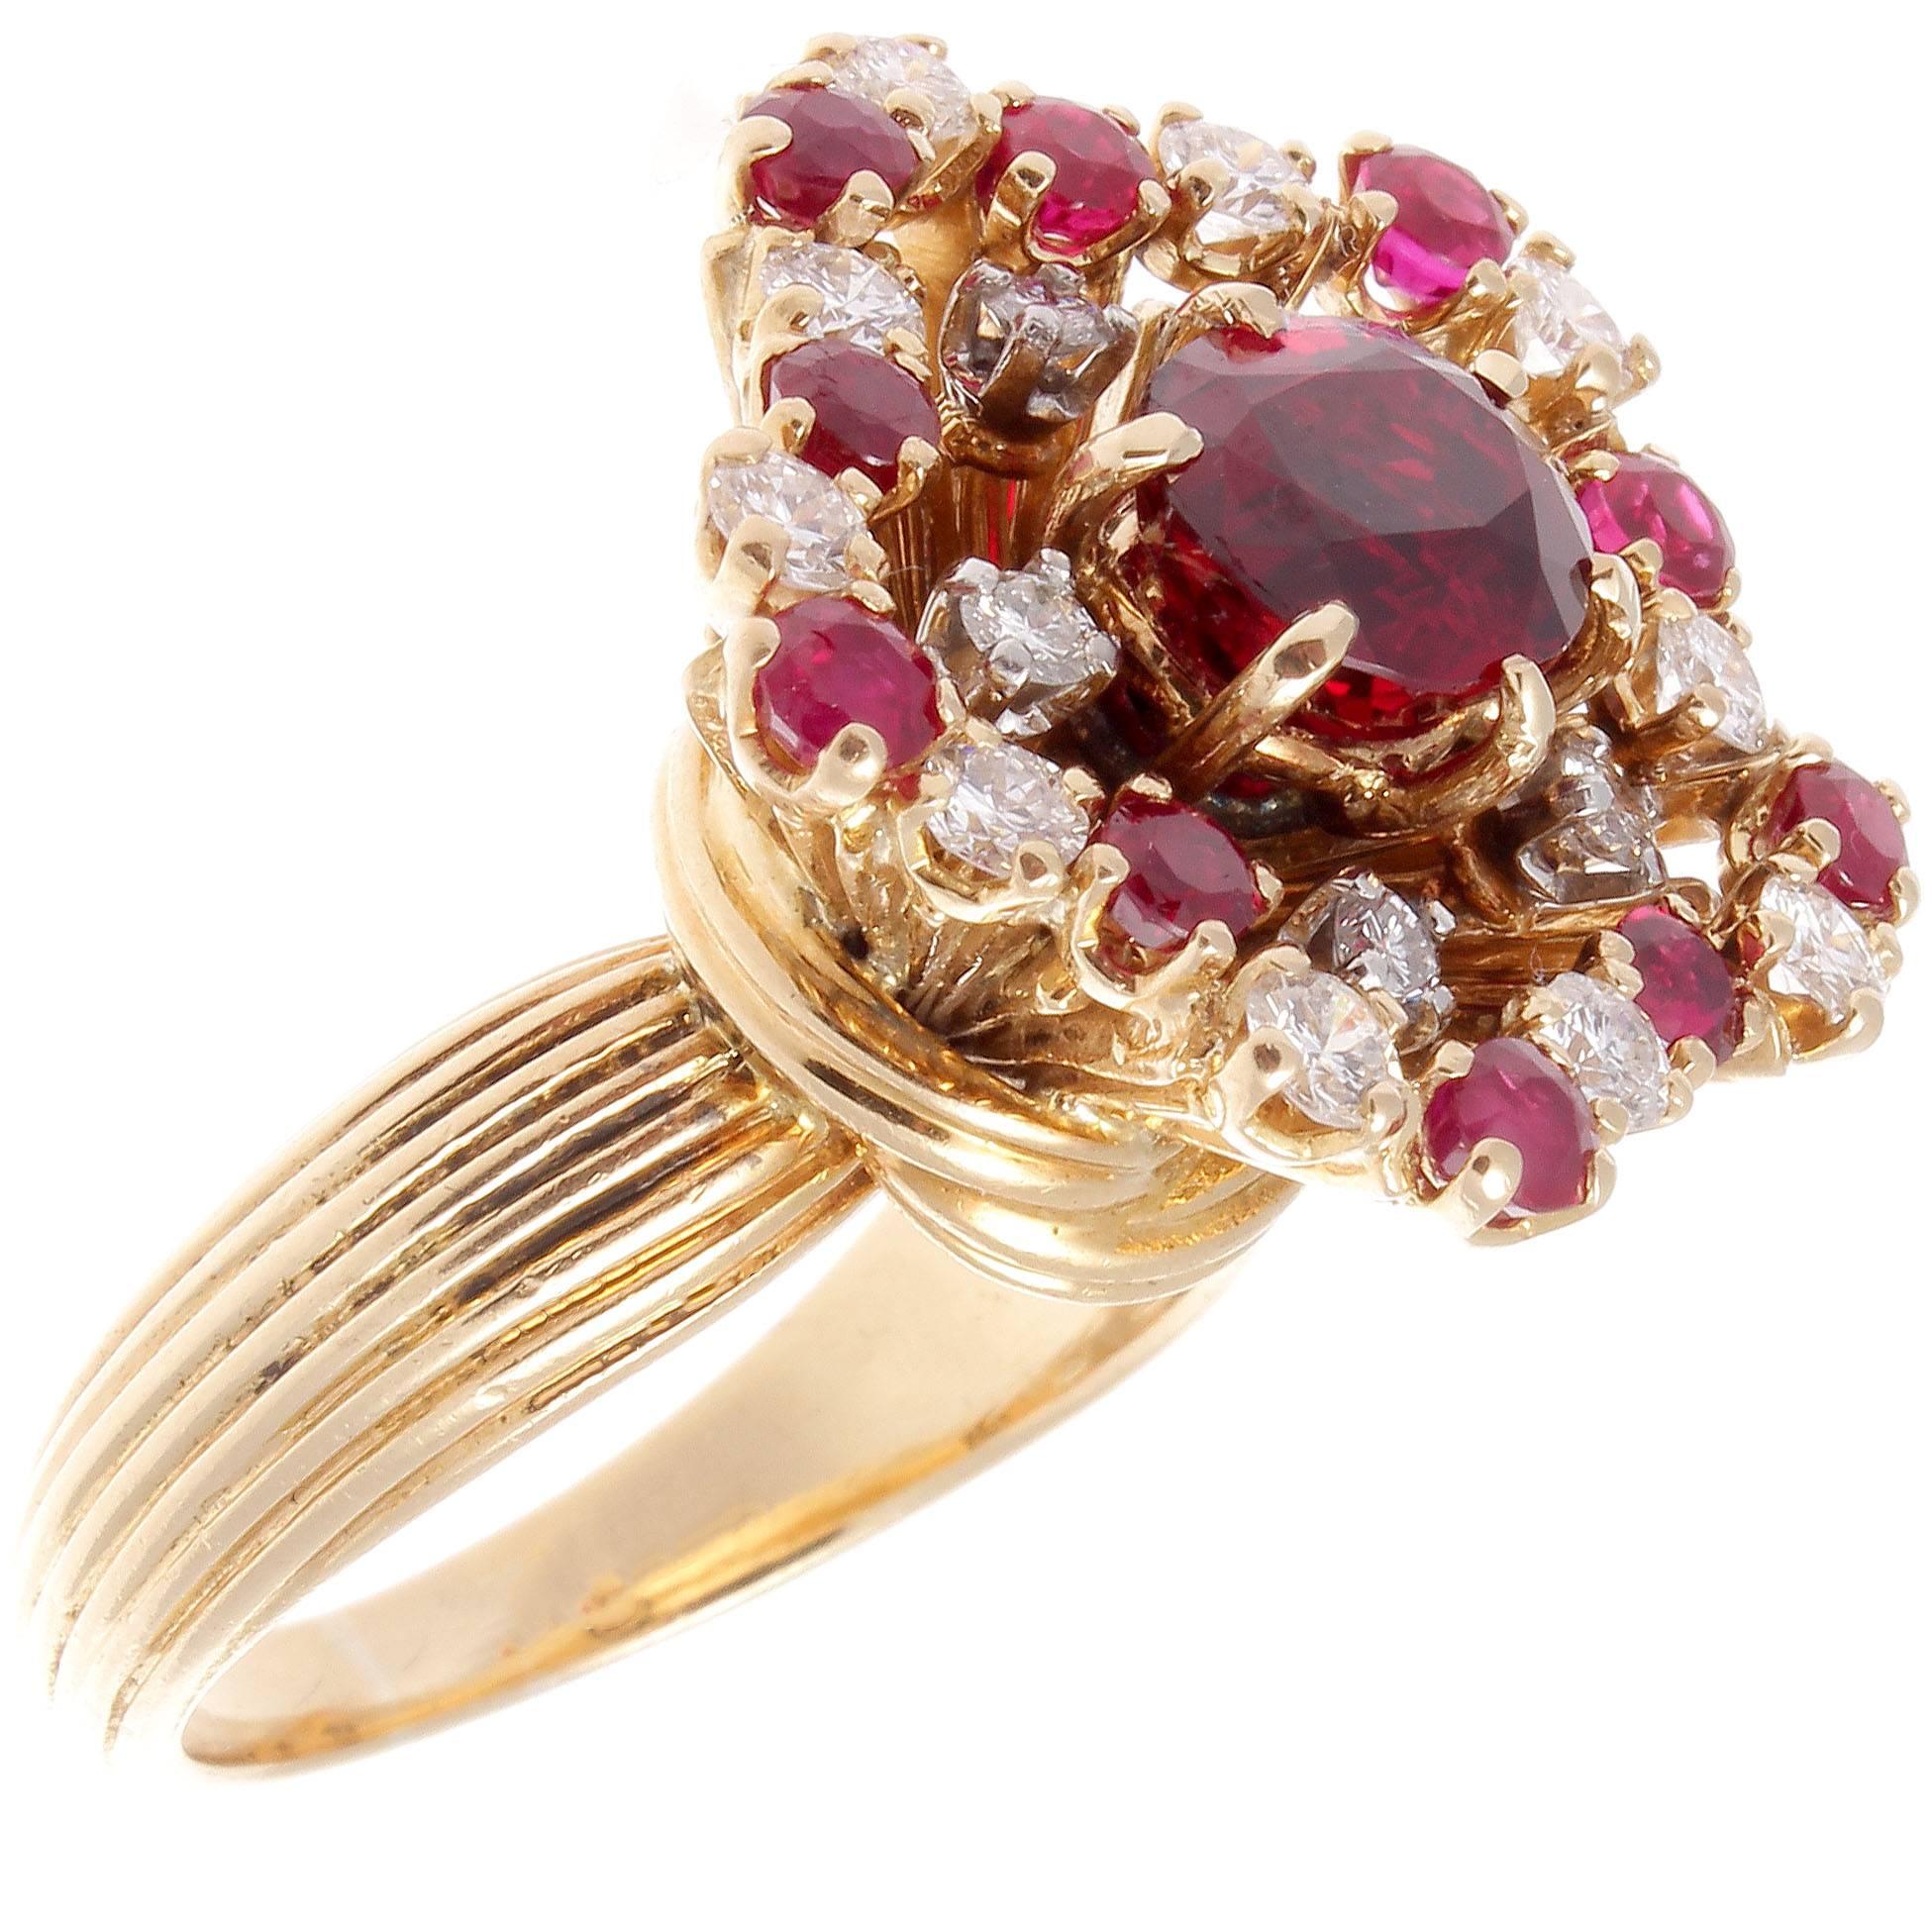 A burst of color radiates from this retro creation that embraces everything the 1940's represented. Featuring a 1.85 carat vibrant translucent gem red ruby. Accented by a spray of perfectly matching vivid red rubies and colorless diamonds to form